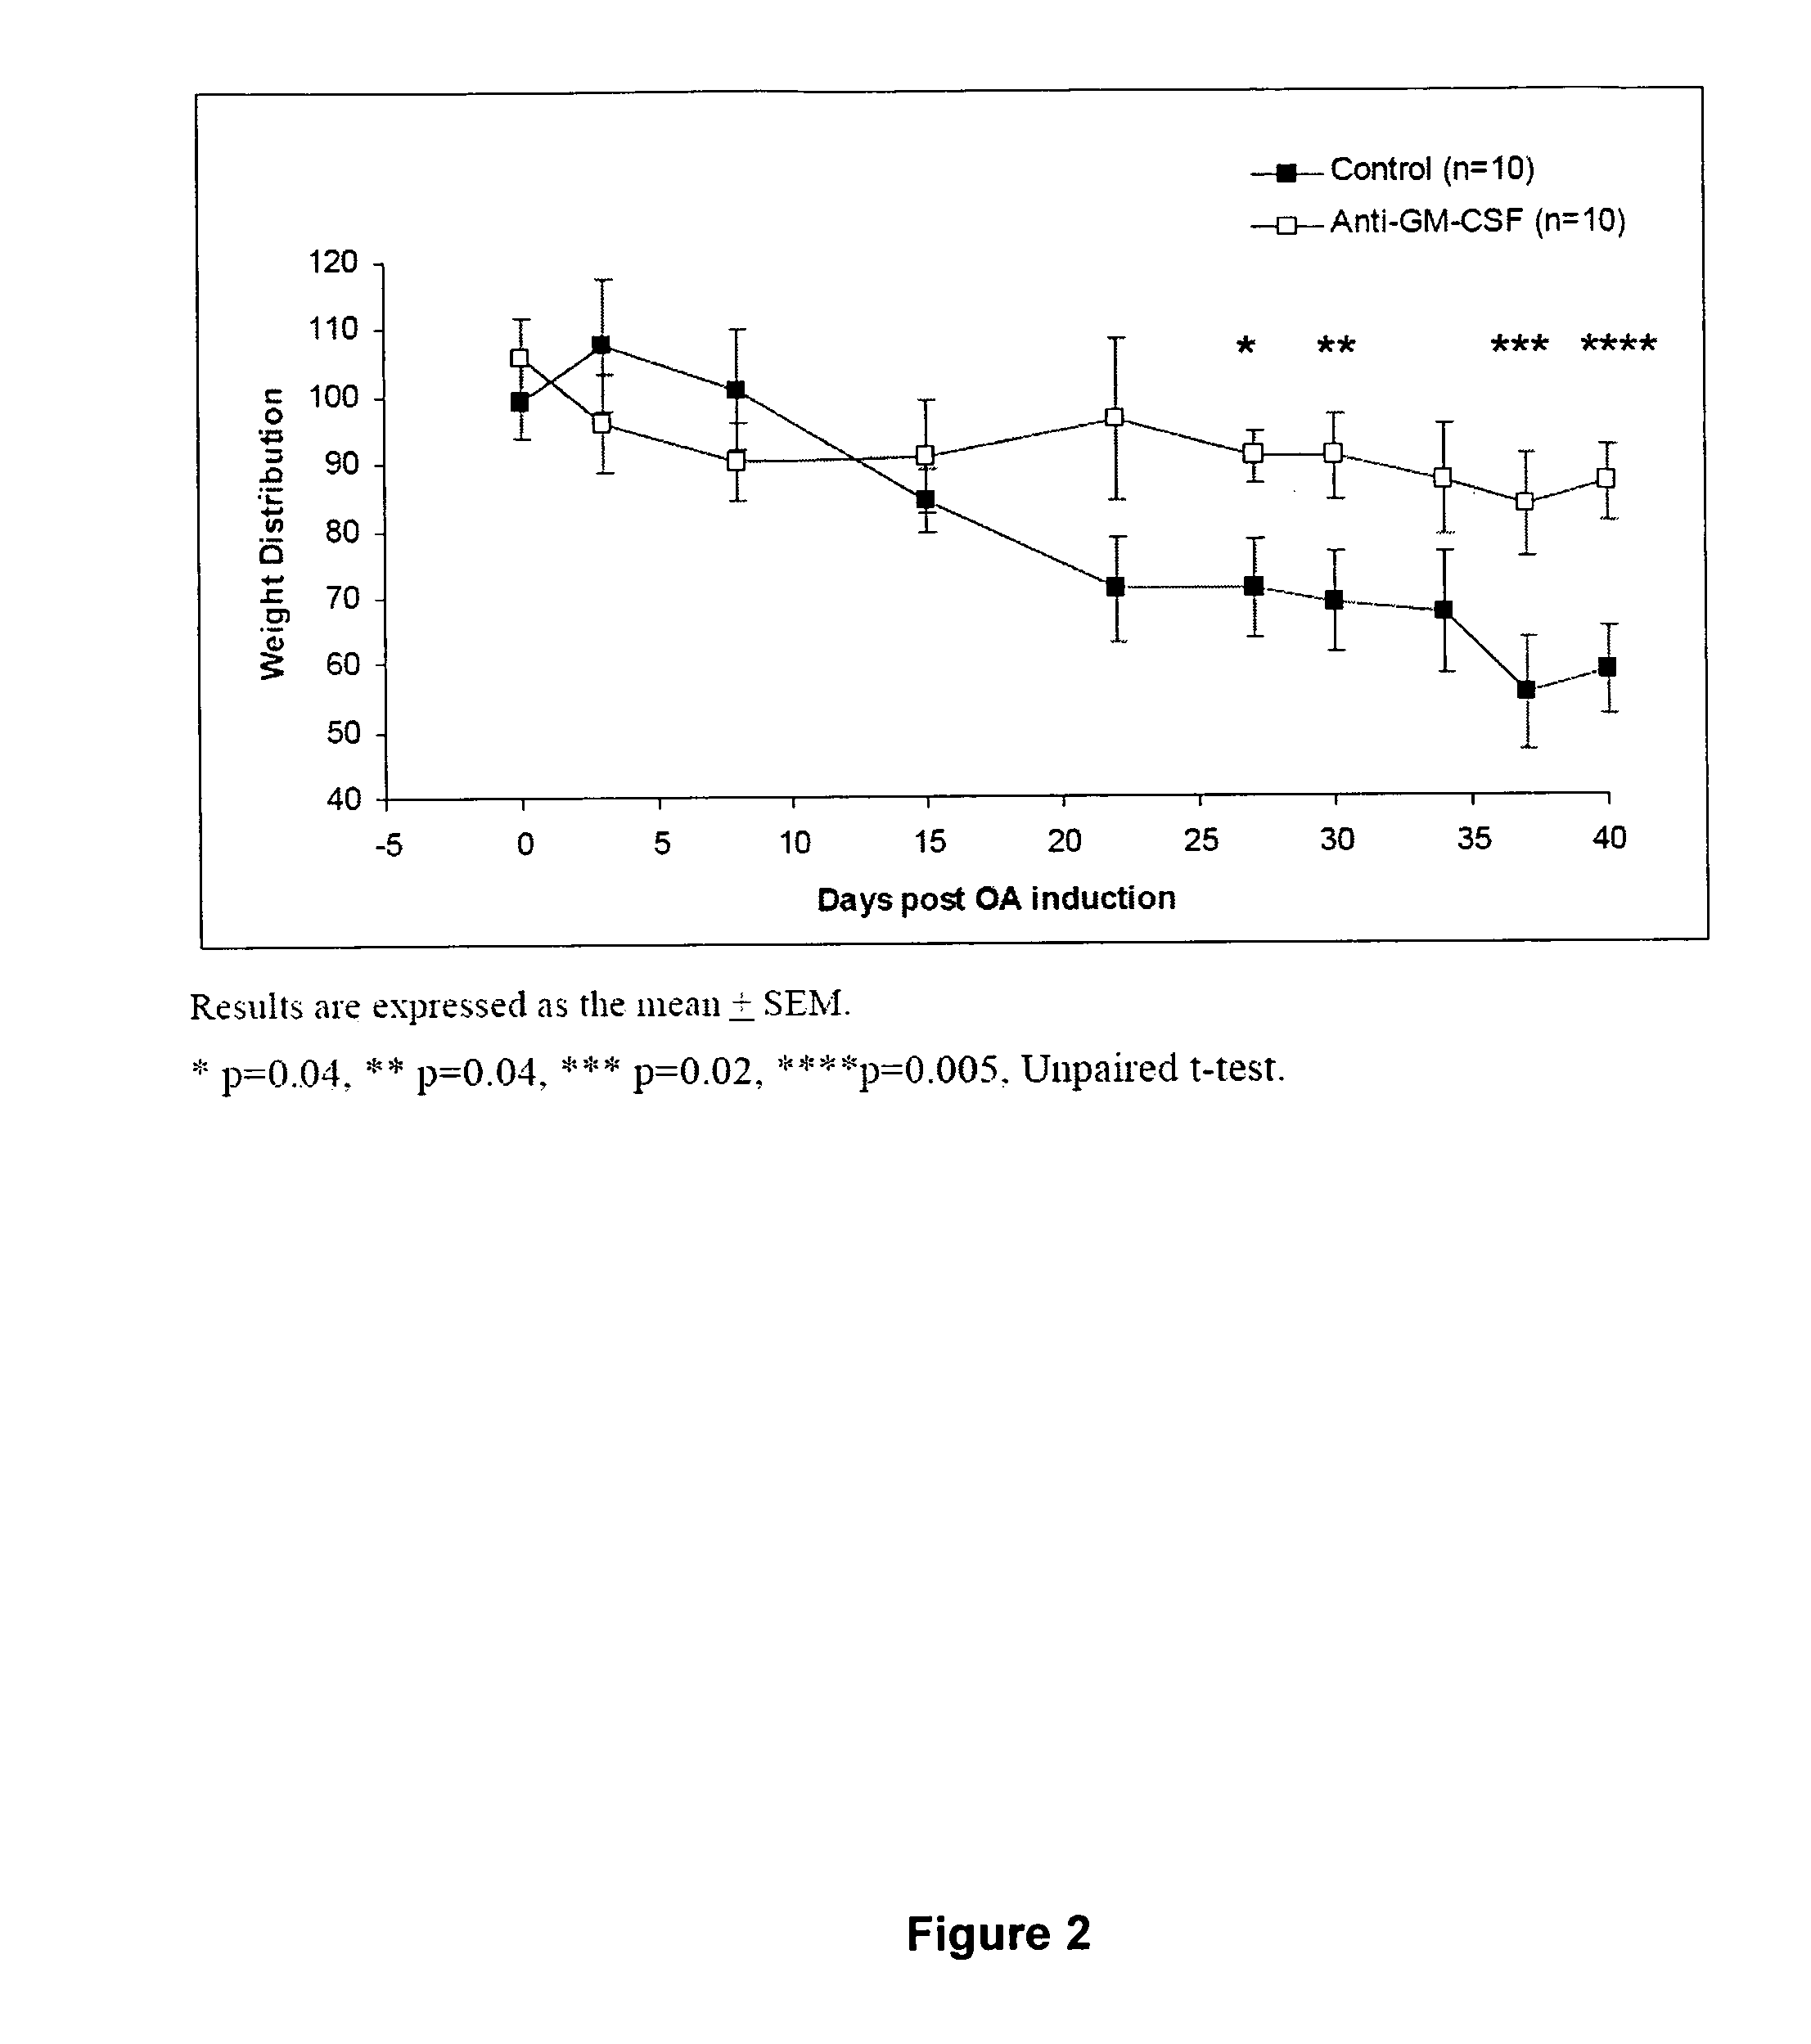 Method of treating pain using an antagonist of GM-CSF